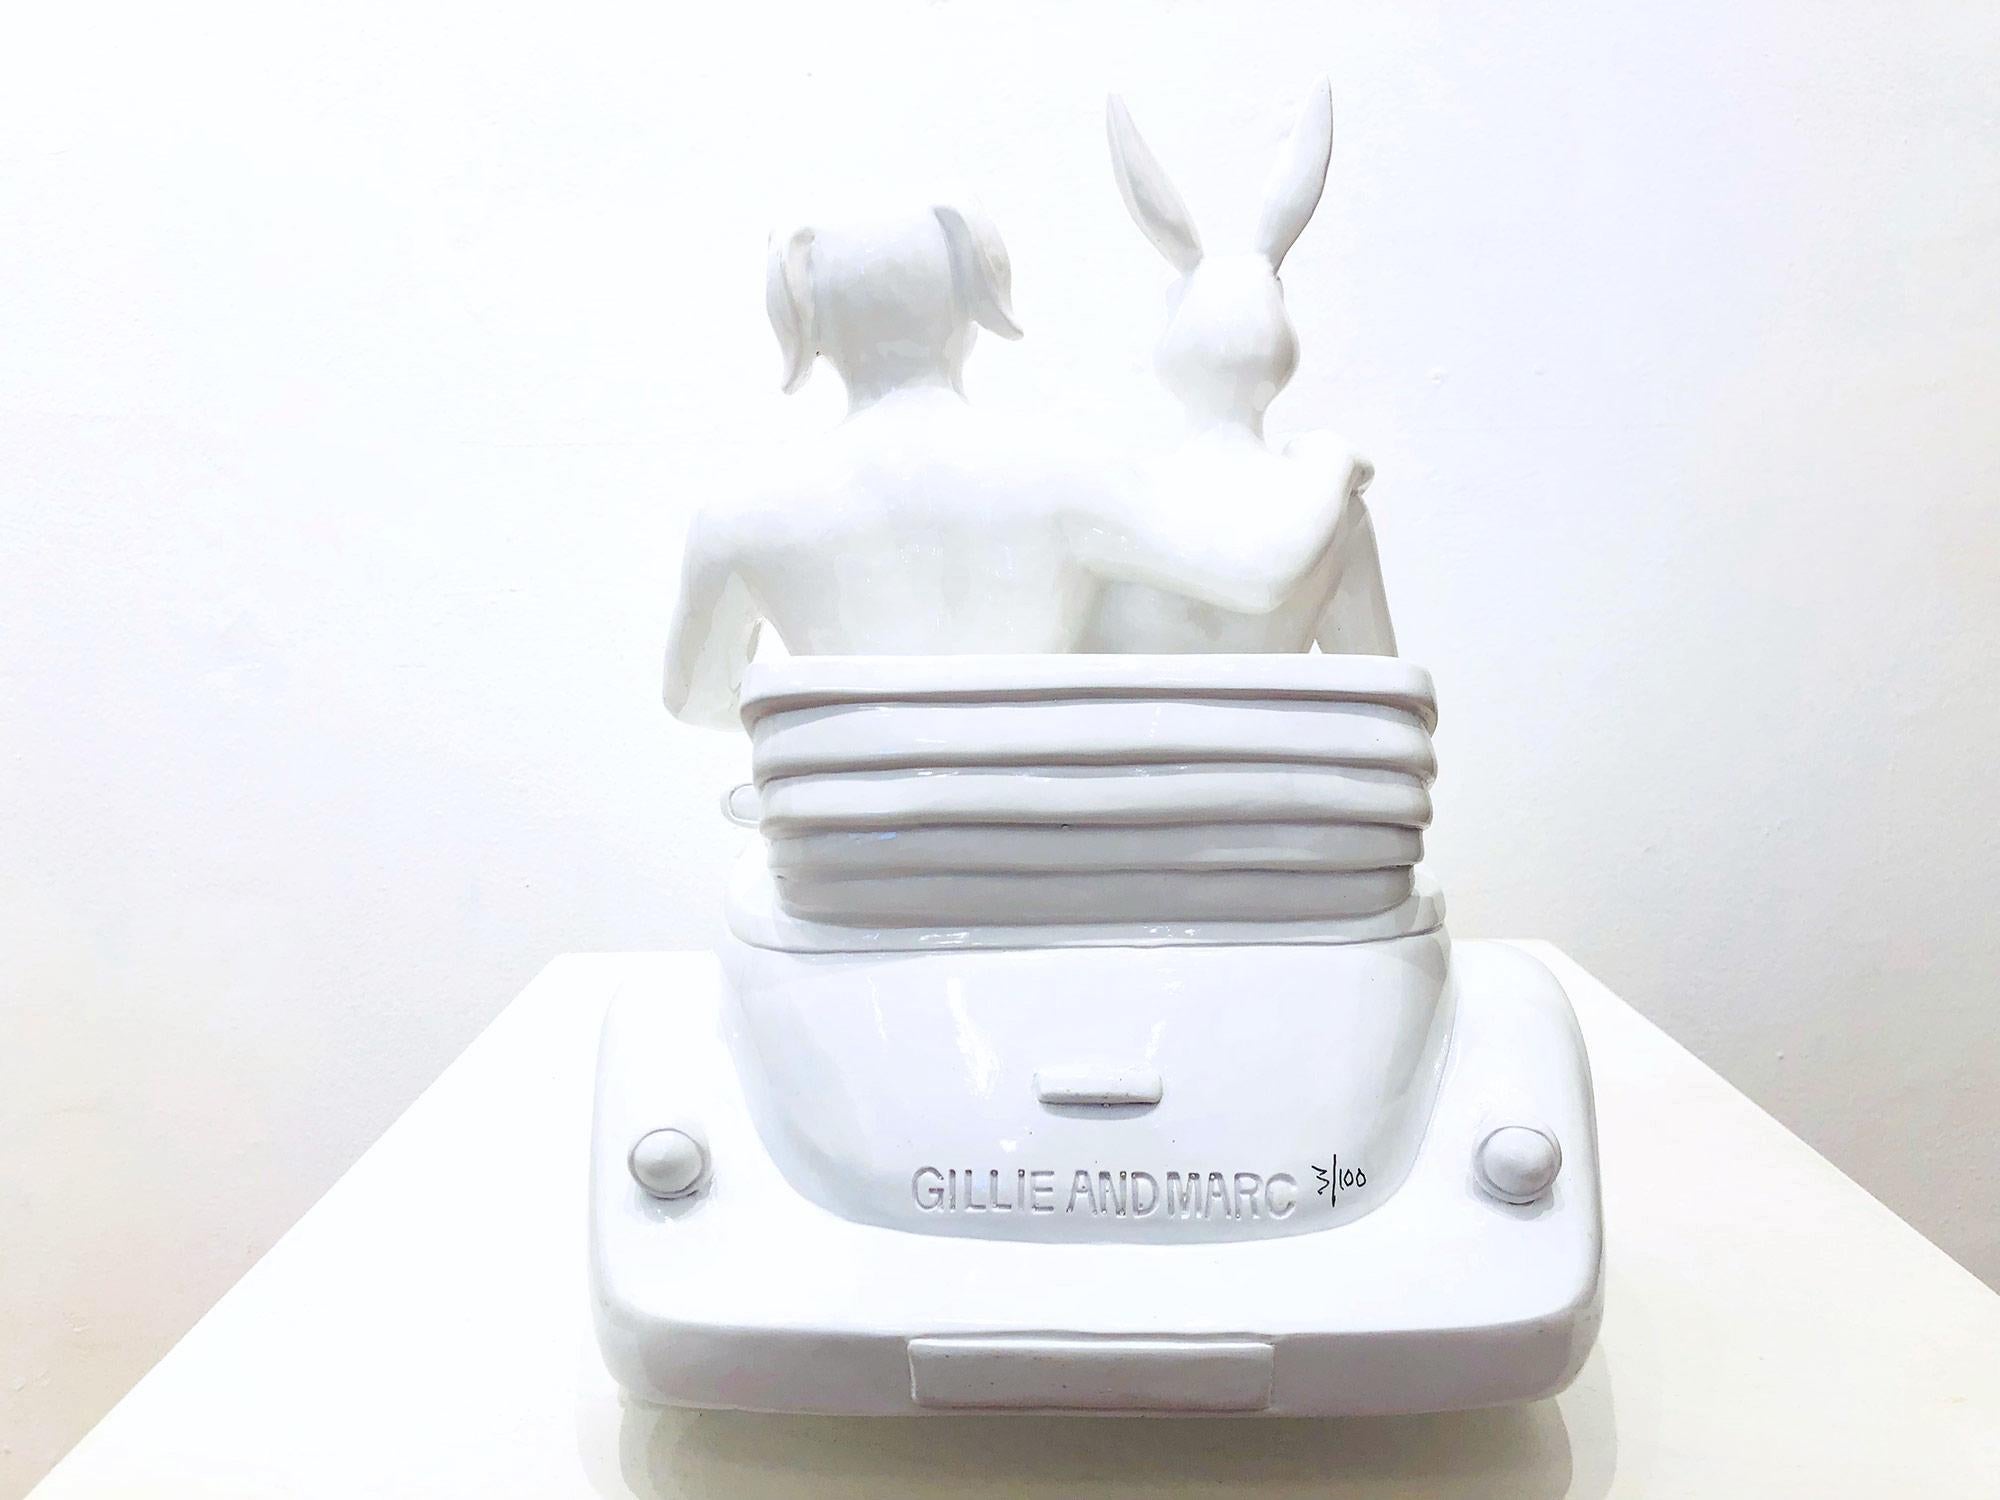 They Loved Driving Their Beetle Convertible Around the Sunny Shores of France - Pop Art Sculpture by Gillie and Marc Schattner